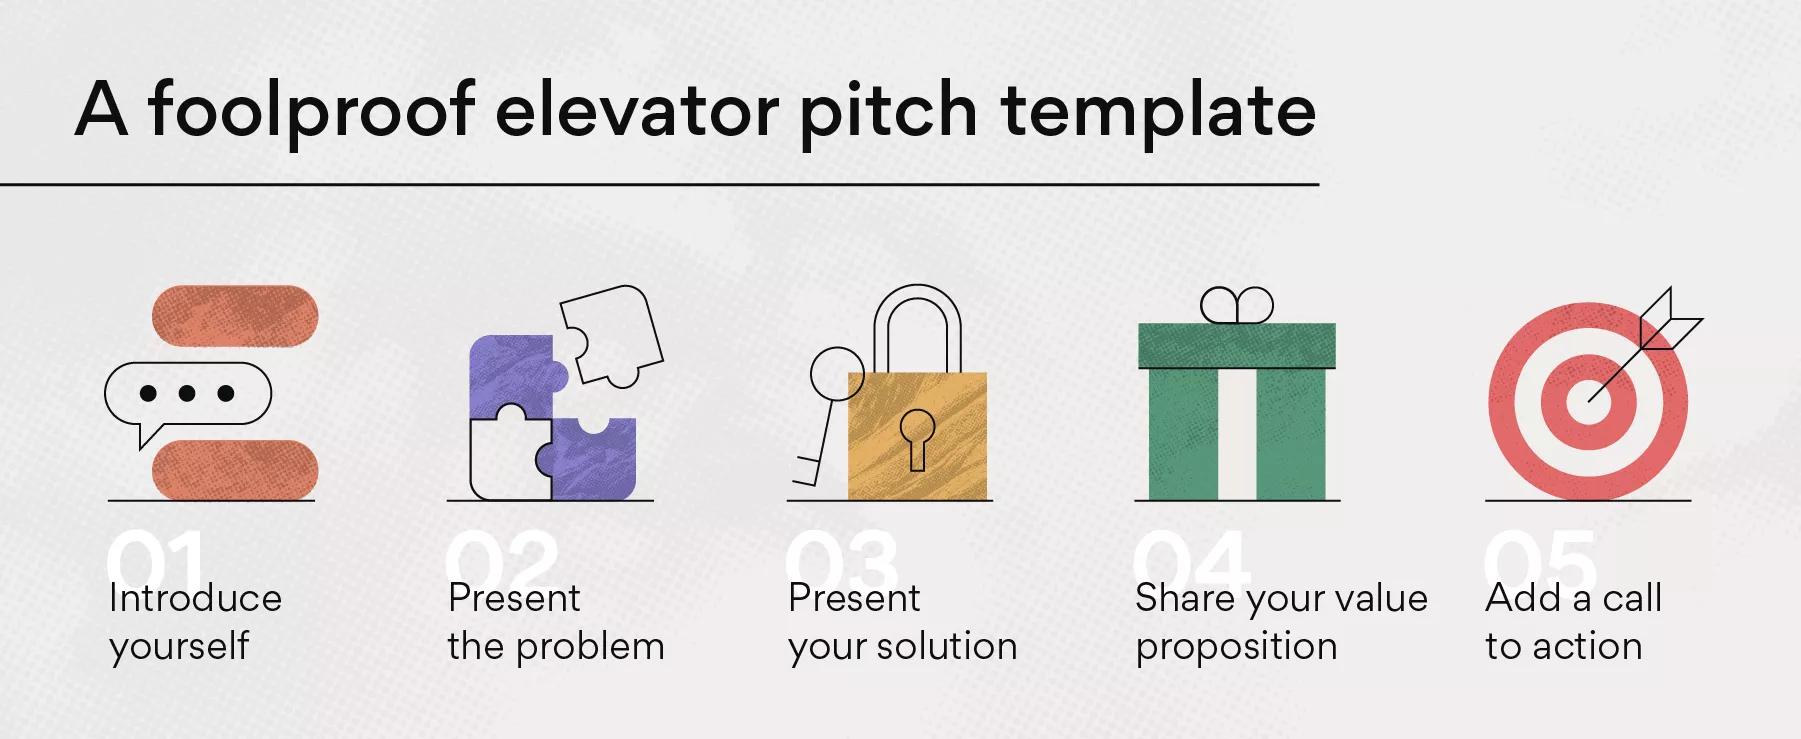 Your Nonprofit Elevator Pitch is Critical